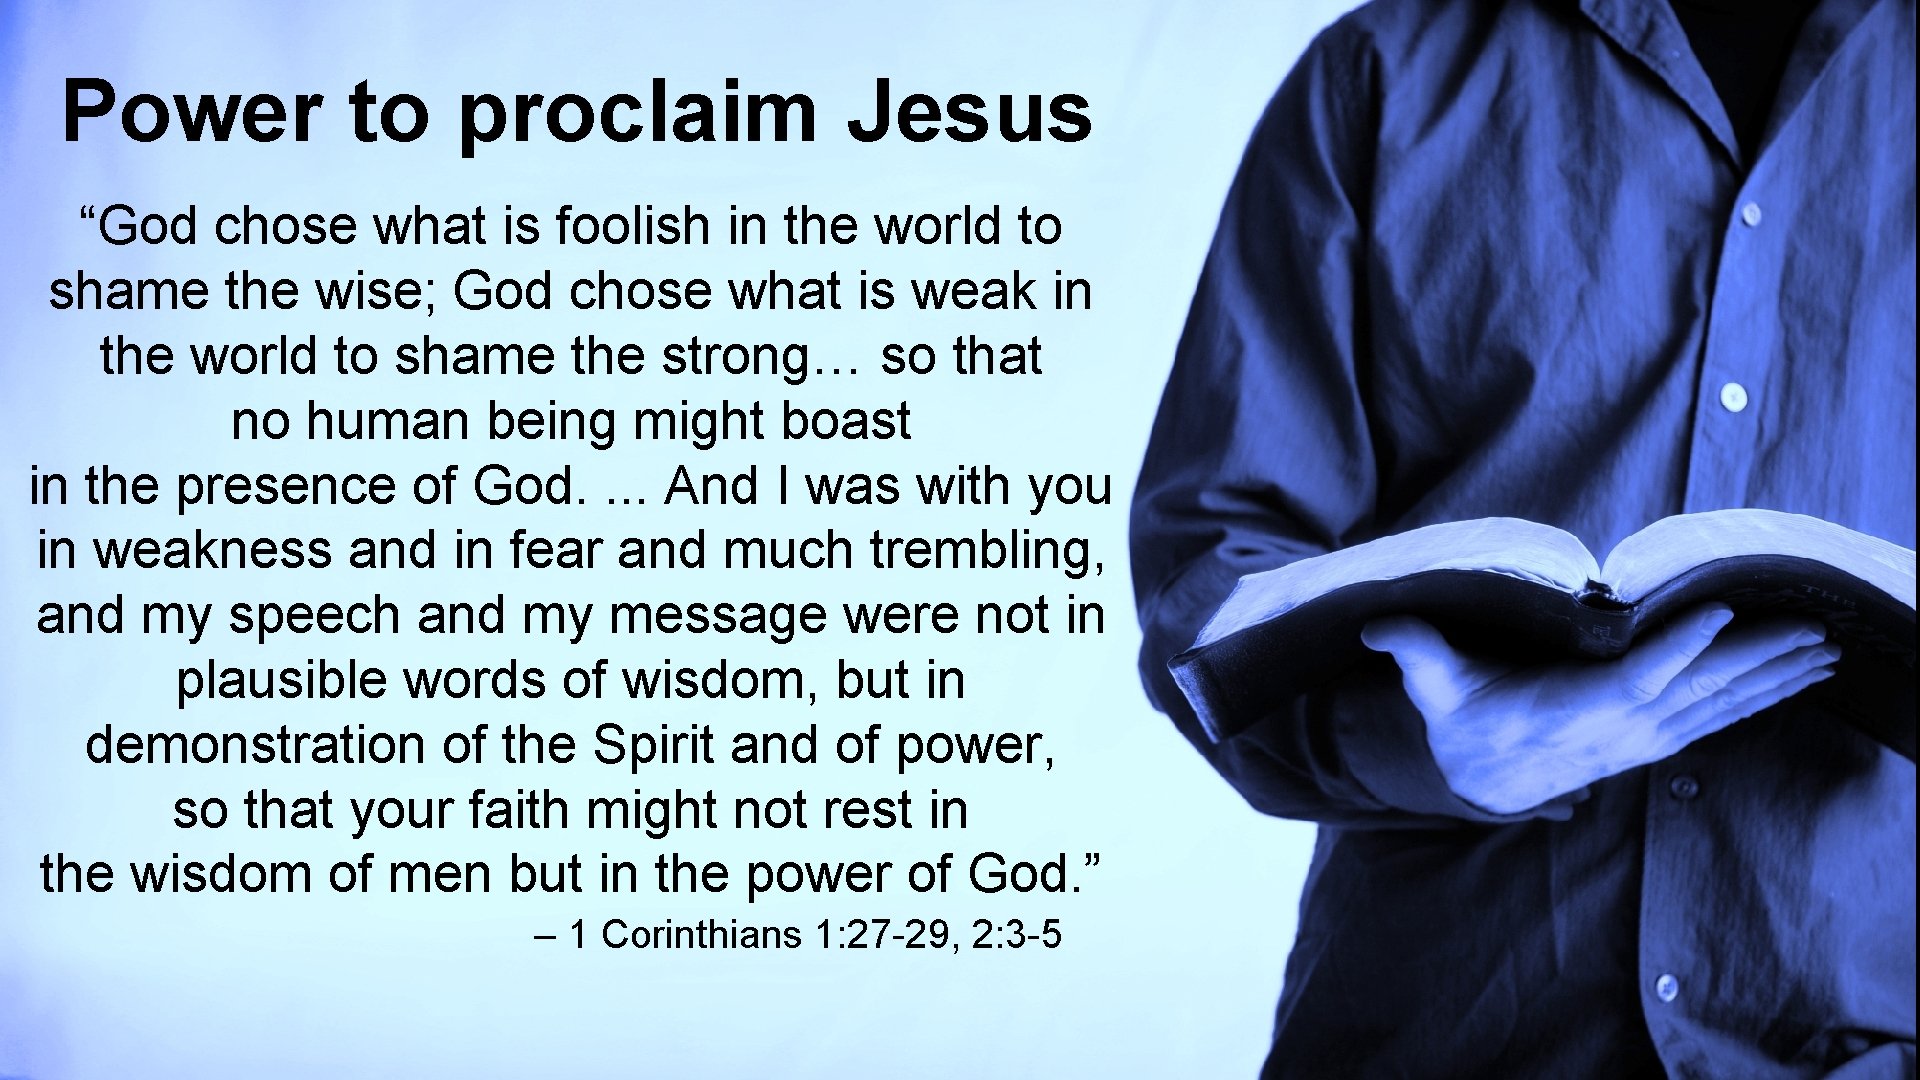 Power to proclaim Jesus “God chose what is foolish in the world to shame